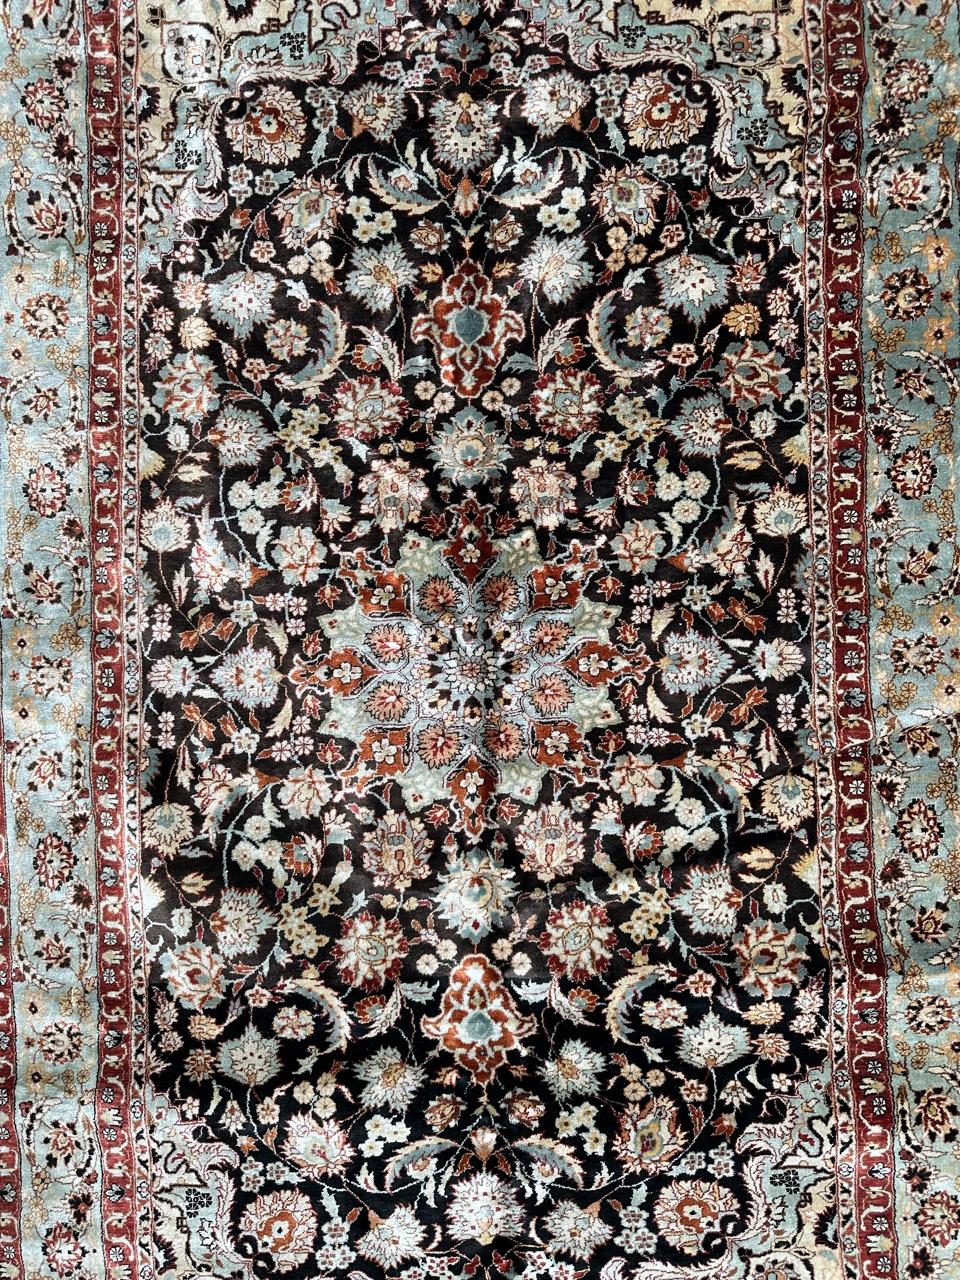 Introducing a stunning vintage Persian Tabriz-style rug, meticulously hand-knotted in China on a silk foundation. This masterpiece features a captivating royal garden scene, with majestic stylized flowers and a pretty médaillon in hues of orange ,